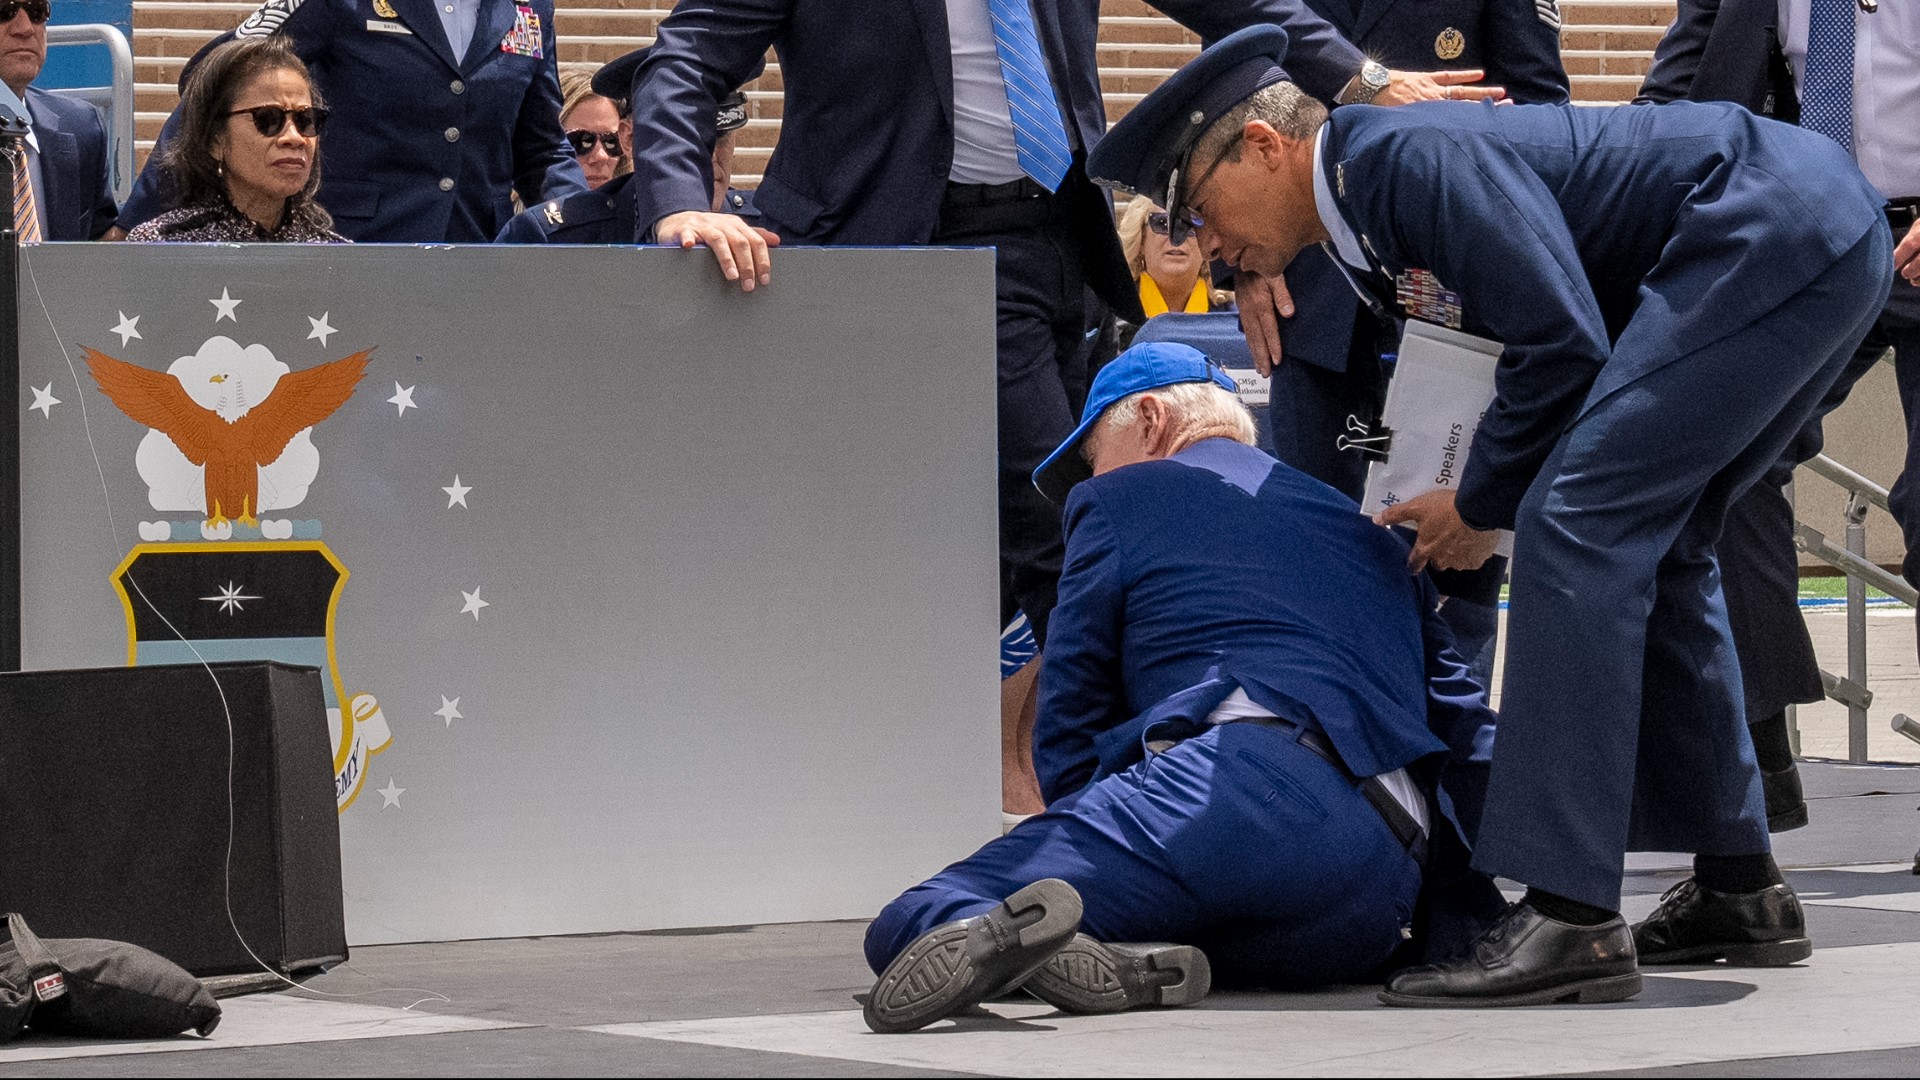 President Joe Biden's appearance at the Air Force Academy's graduation ceremony was punctuated by a stumble onstage after handing out diplomas to graduates.